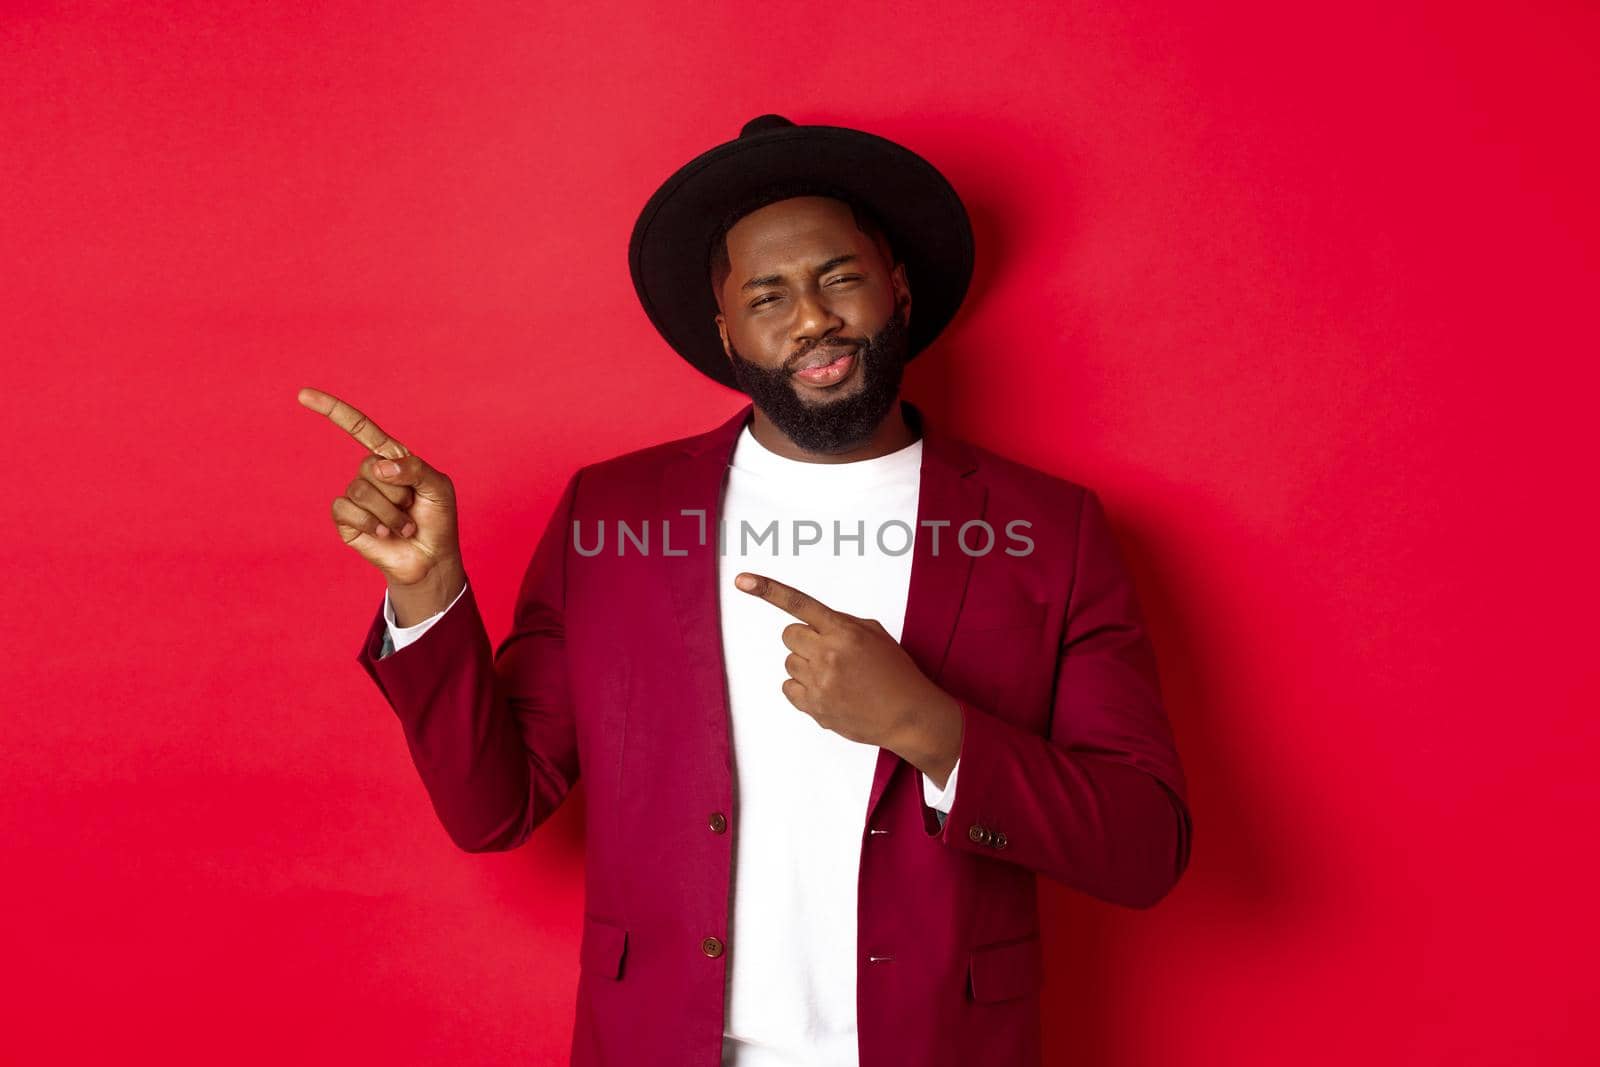 Winter holidays and shopping concept. Skeptical african american man looking unsure, pointing left at logo, having doubts, standing against red background.